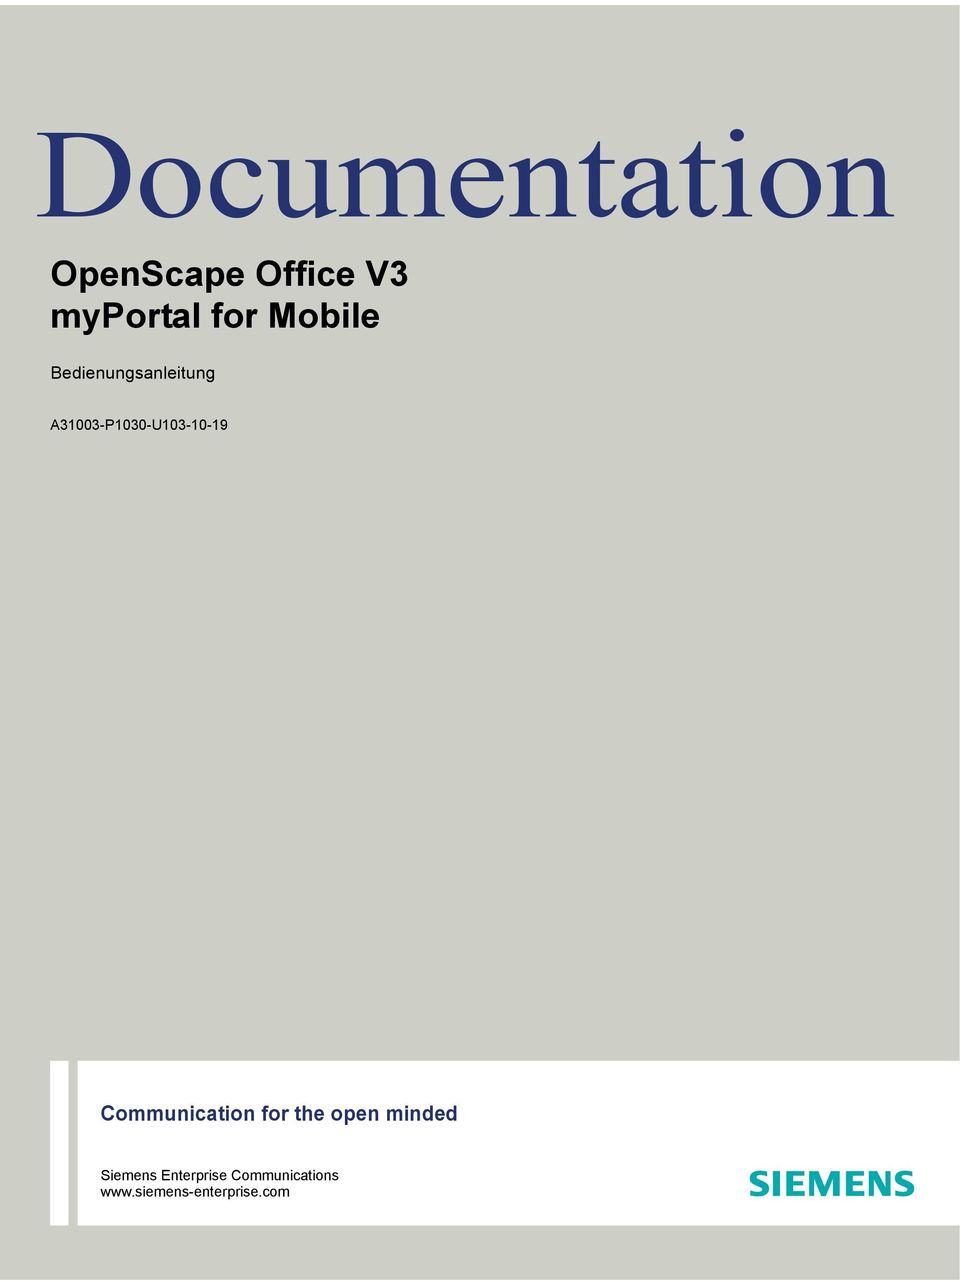 2011 Documentation OpenScape Office V3 myportal for Mobile Bedienungsanleitung